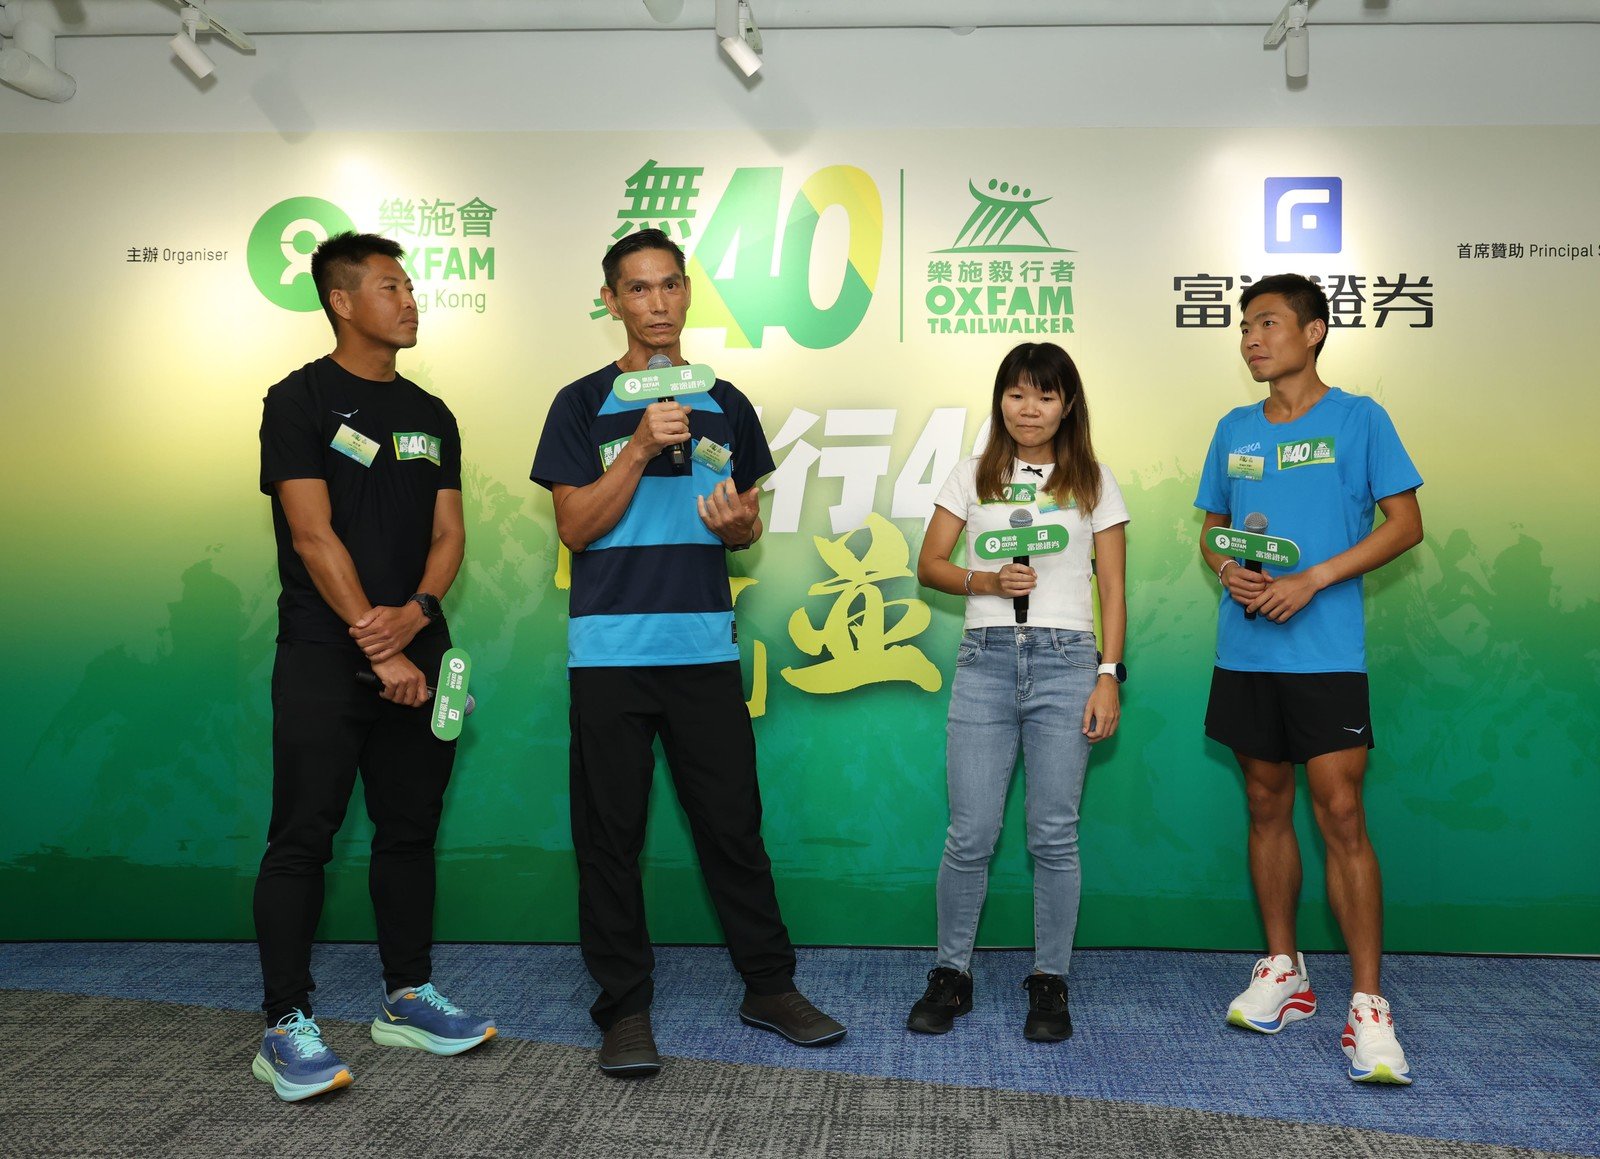 (From left to right) Elite walker Law Chor Kin, KK Chan Kwok Keung, founder of the TTR Trailwalker Teaching Room Charity Foundation, elite walkers Leung Ying Suet and Tsang Fuk Cheung, shared their Trailwalker experience, encouraging the public to actively participate and support Oxfam's poverty alleviation work.